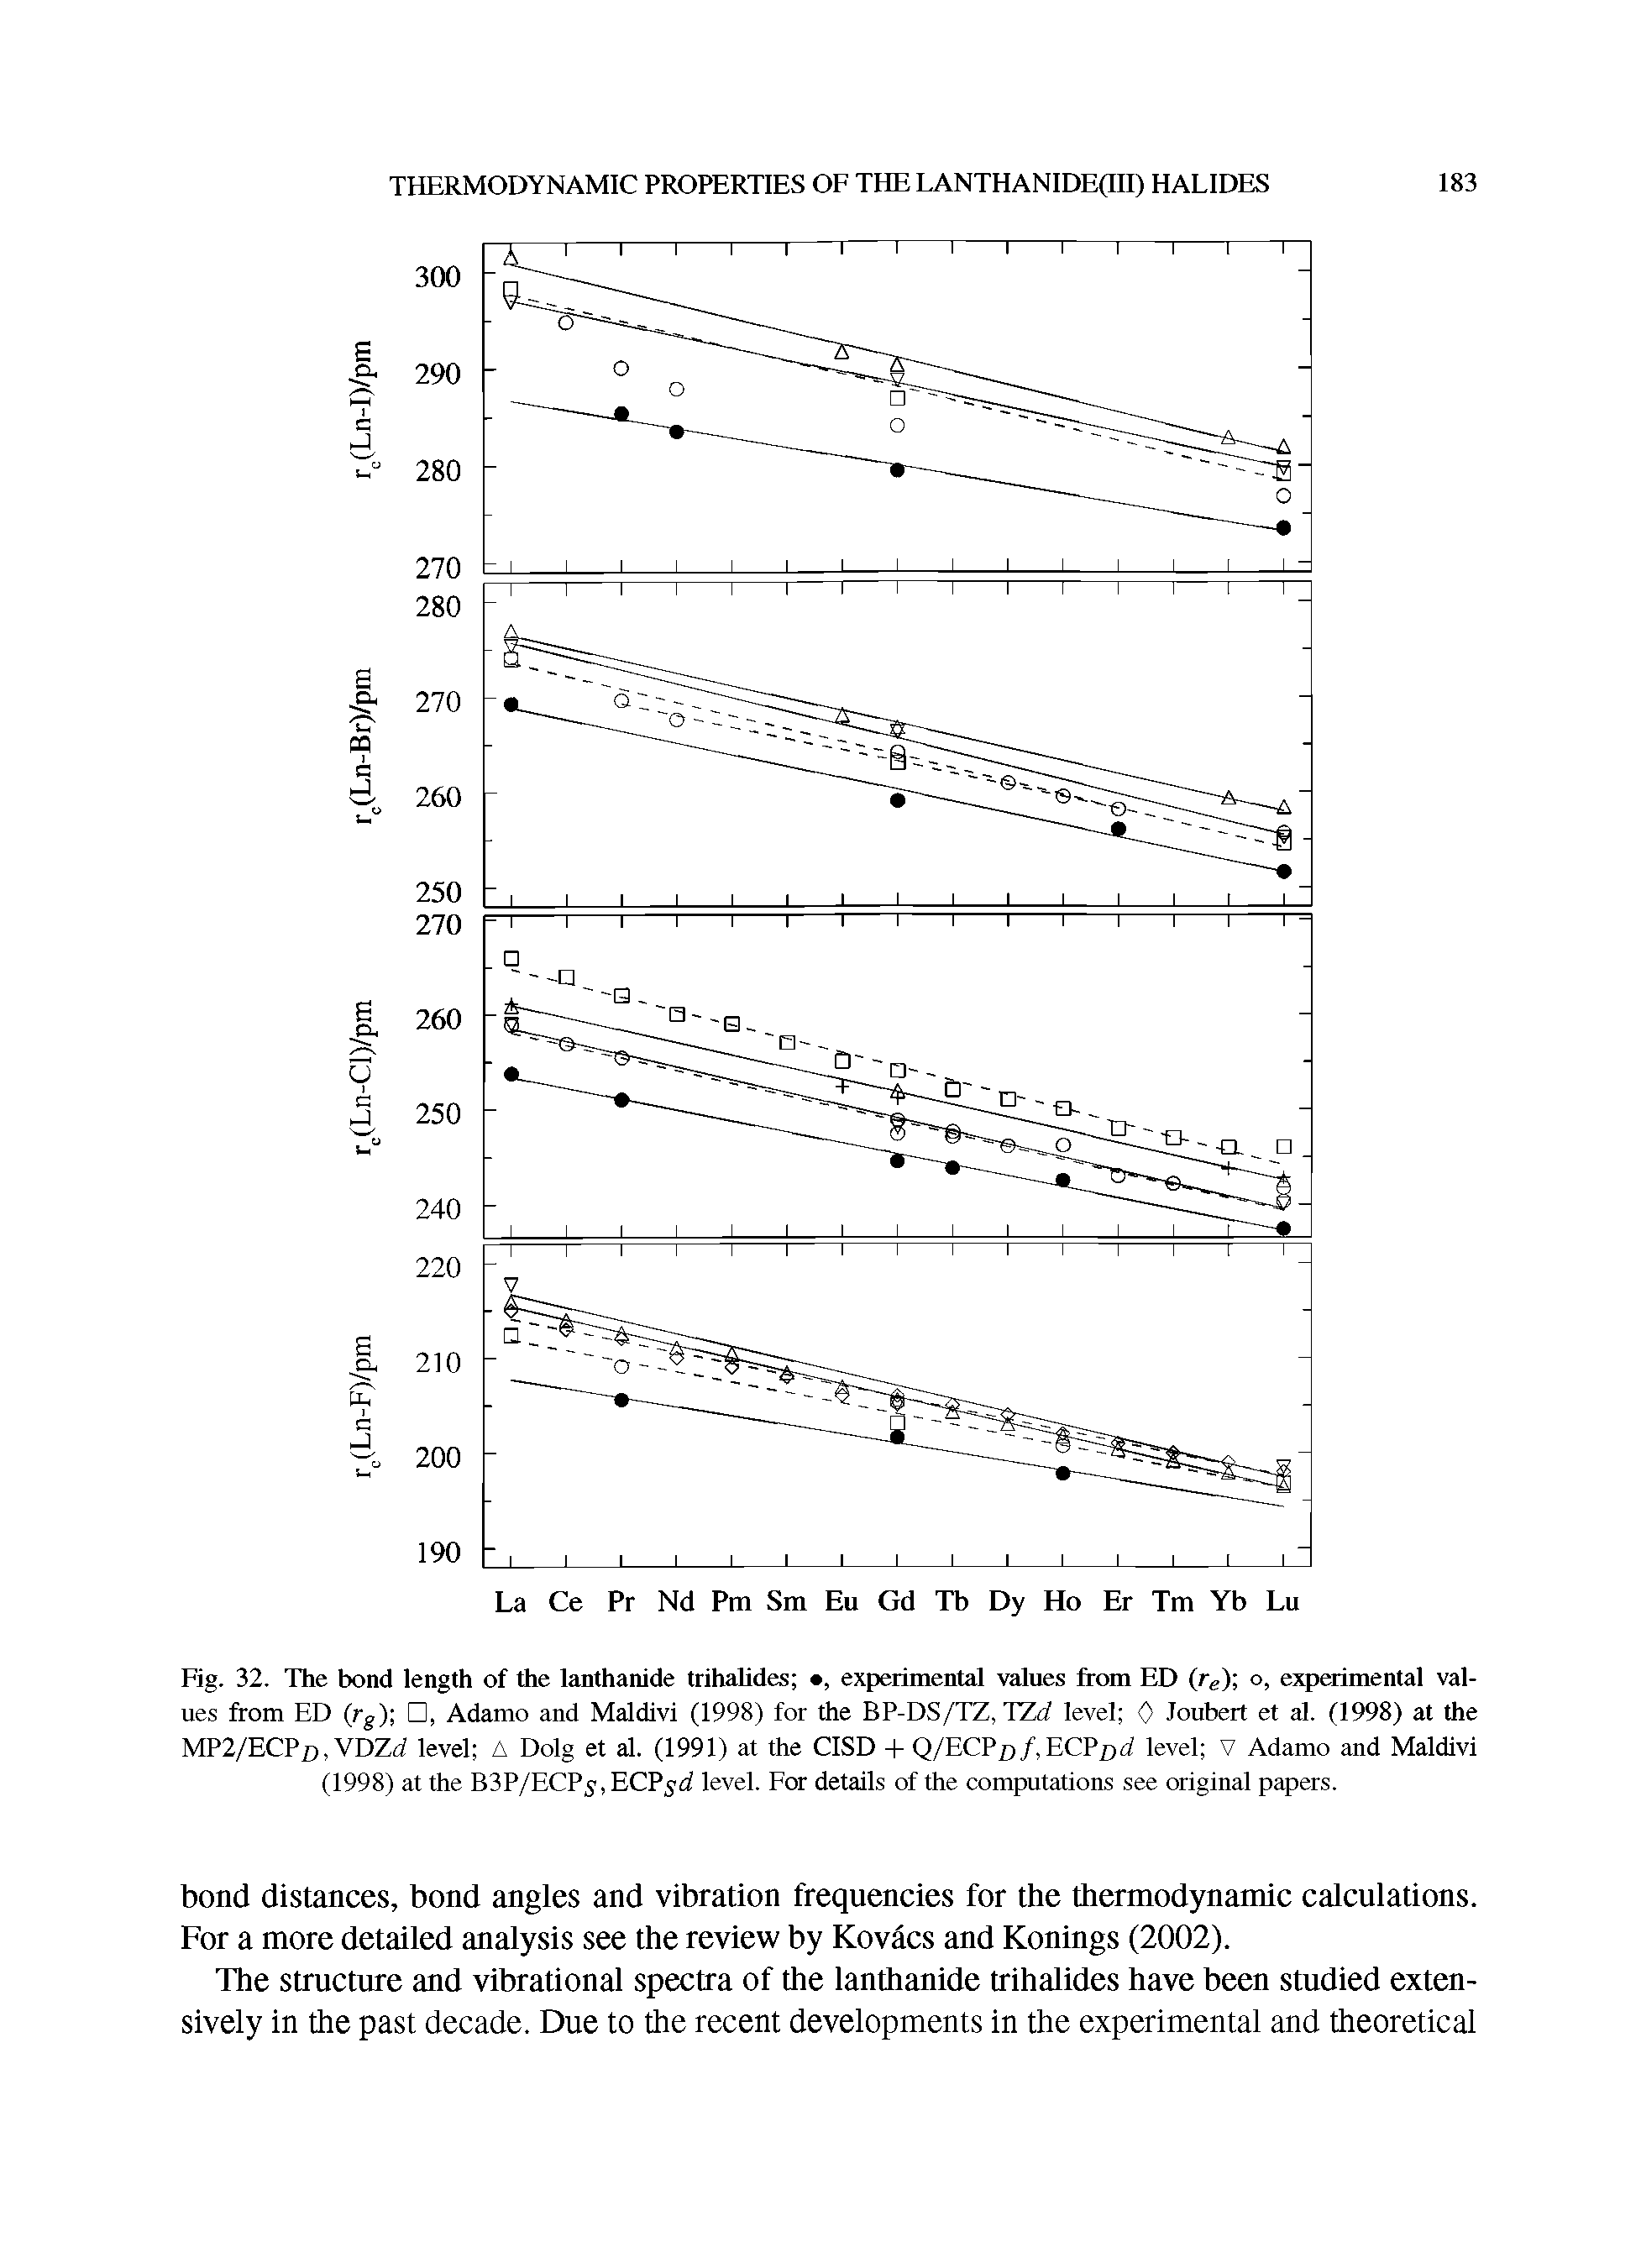 Fig. 32. The bond length of the lanthanide trihalides , experimental values from ED ) o, experimental values from ED (rg) , Adamo and Maldivi (1998) for the BP-DS/TZ, TZd level 0 Joubert et al. (1998) at the MP2/ECP/J, VDZrf level A Dolg et al. (1991) at the CISD + Q/ECP/j/, ECP/jrf level V Adamo and Maldivi (1998) at the B3P/ECP51, ECP d level. For details of the computations see original papers.